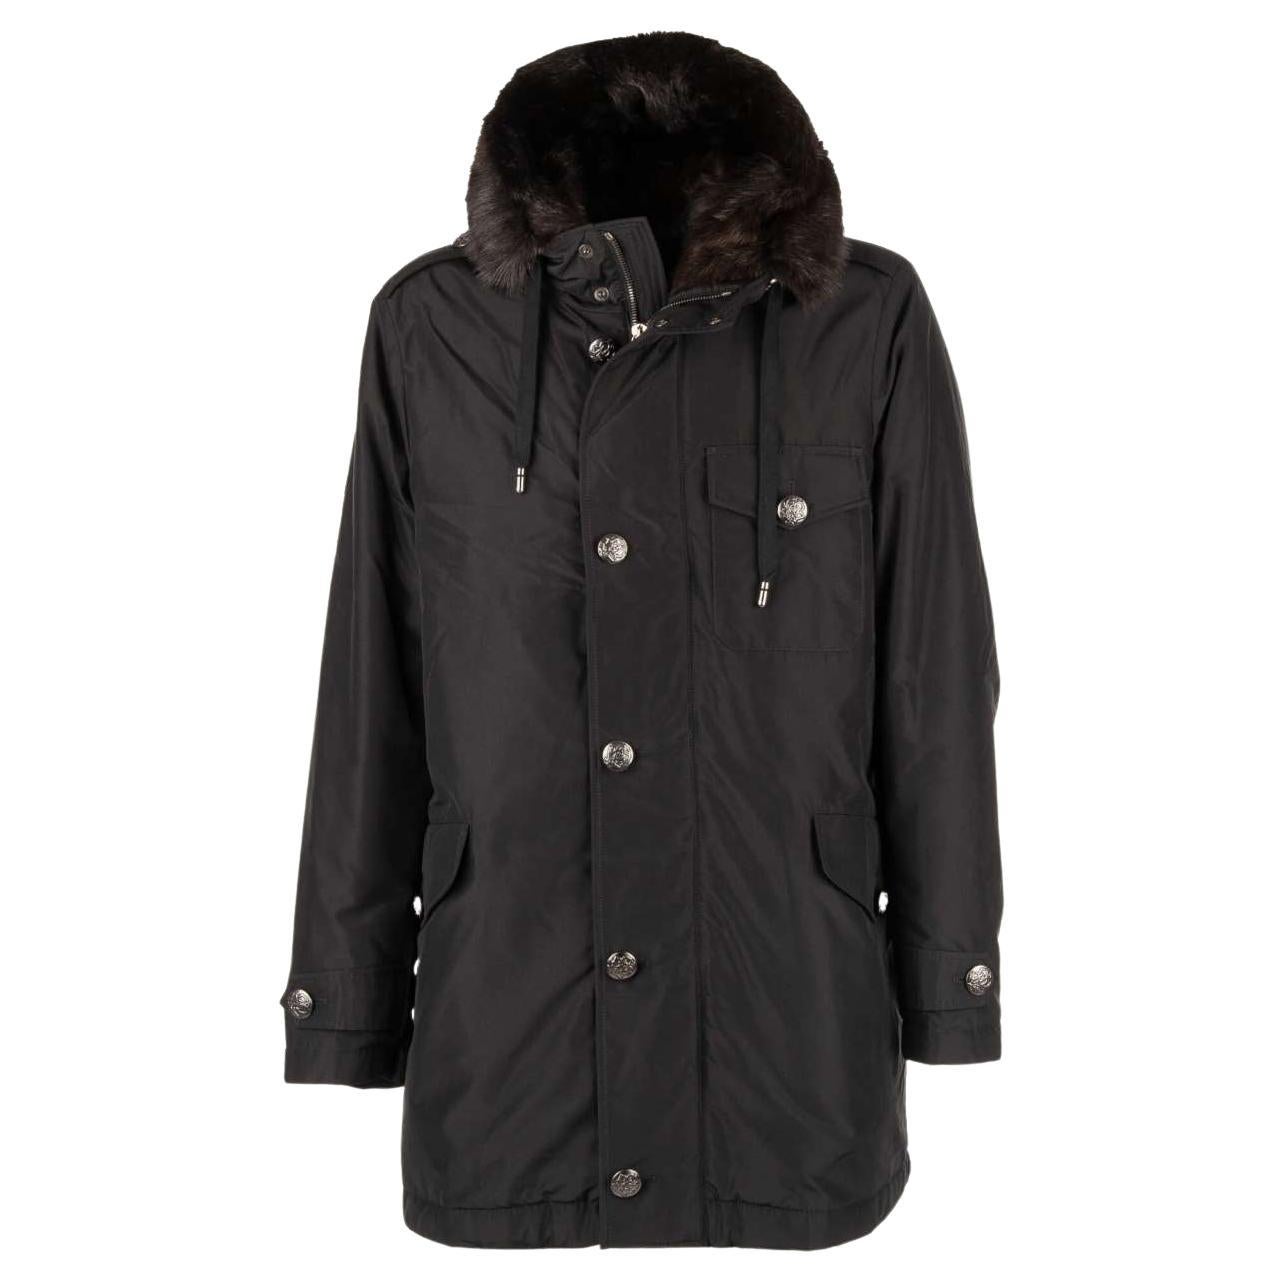 Dolce & Gabbana Silk Parka Jacket with Detachable Fur Lining and Hoody Black 56 For Sale